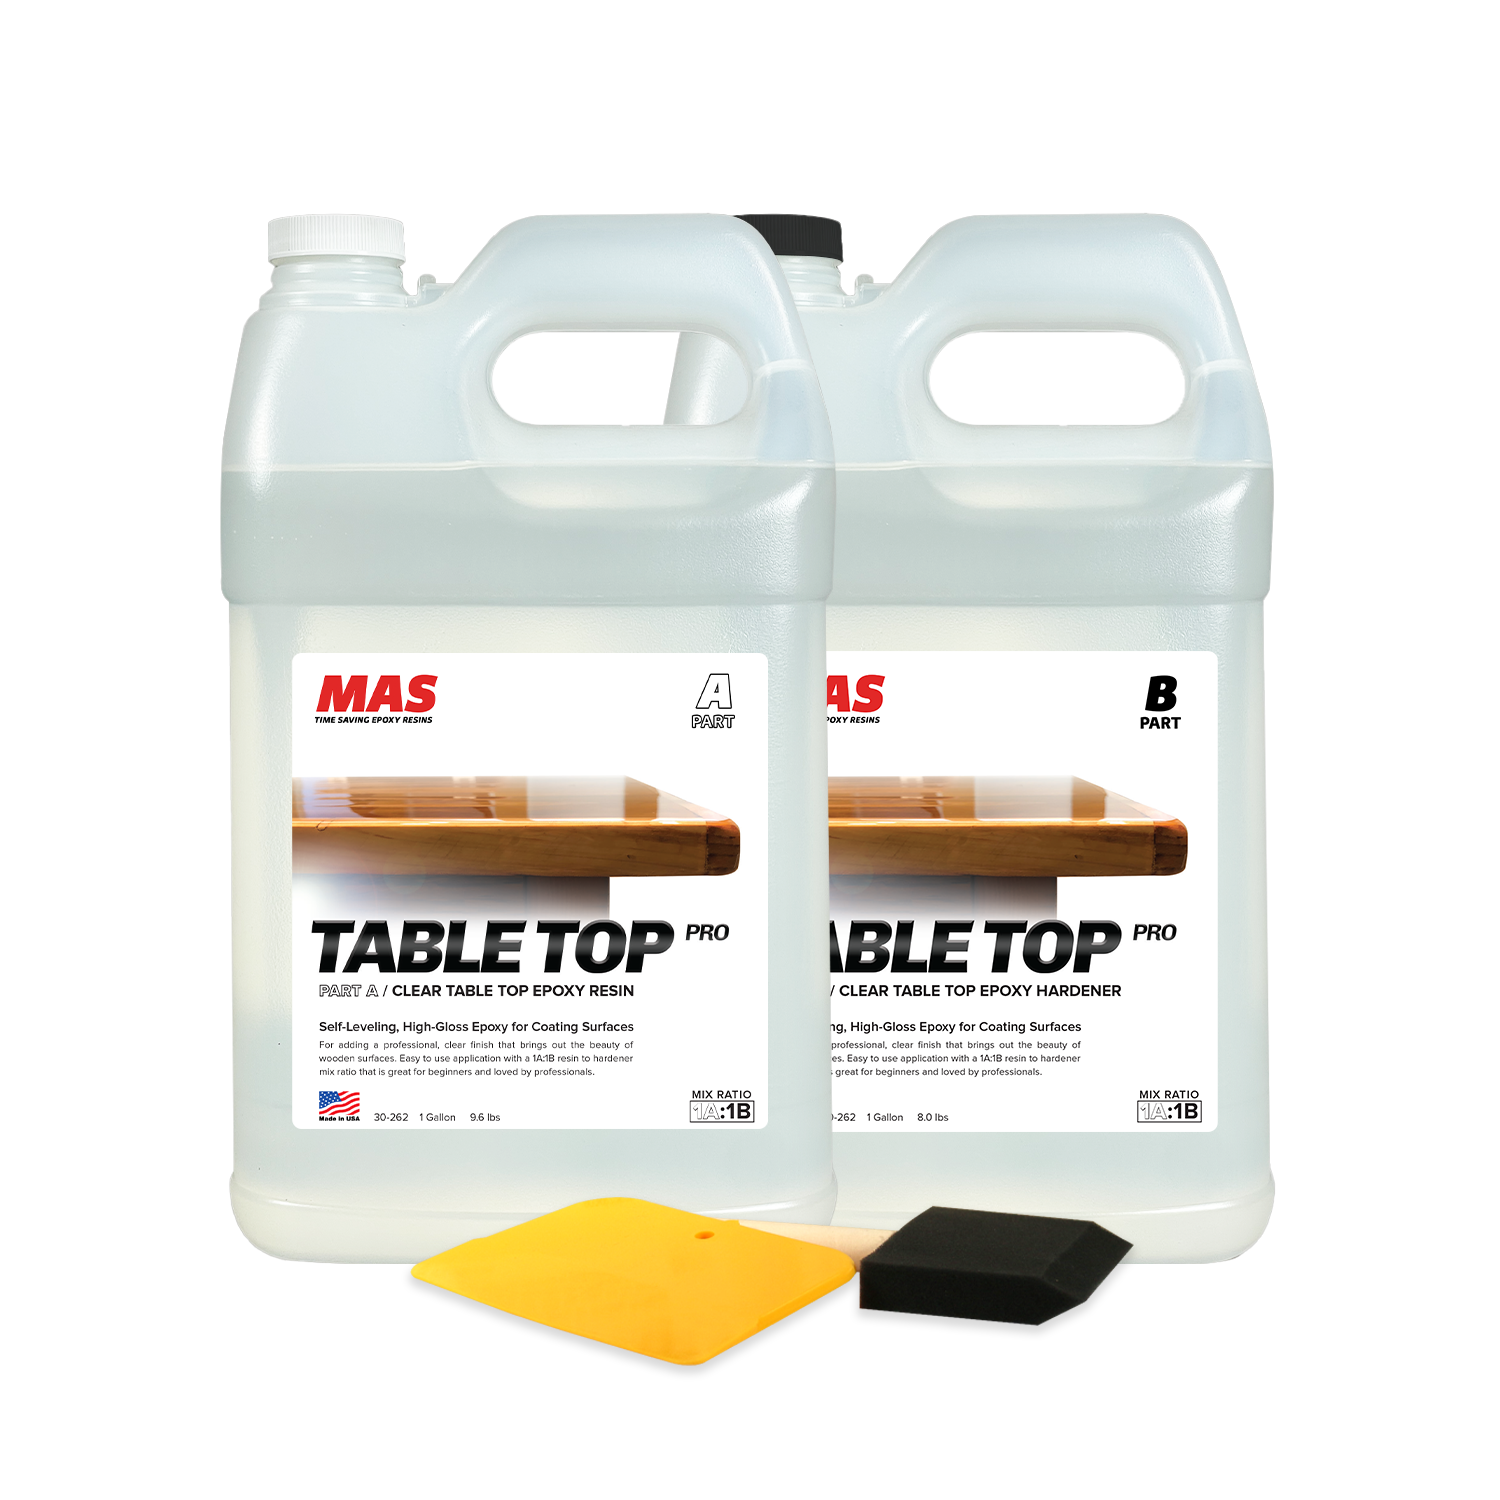 Can Table Top Pro work on a vertical surface?